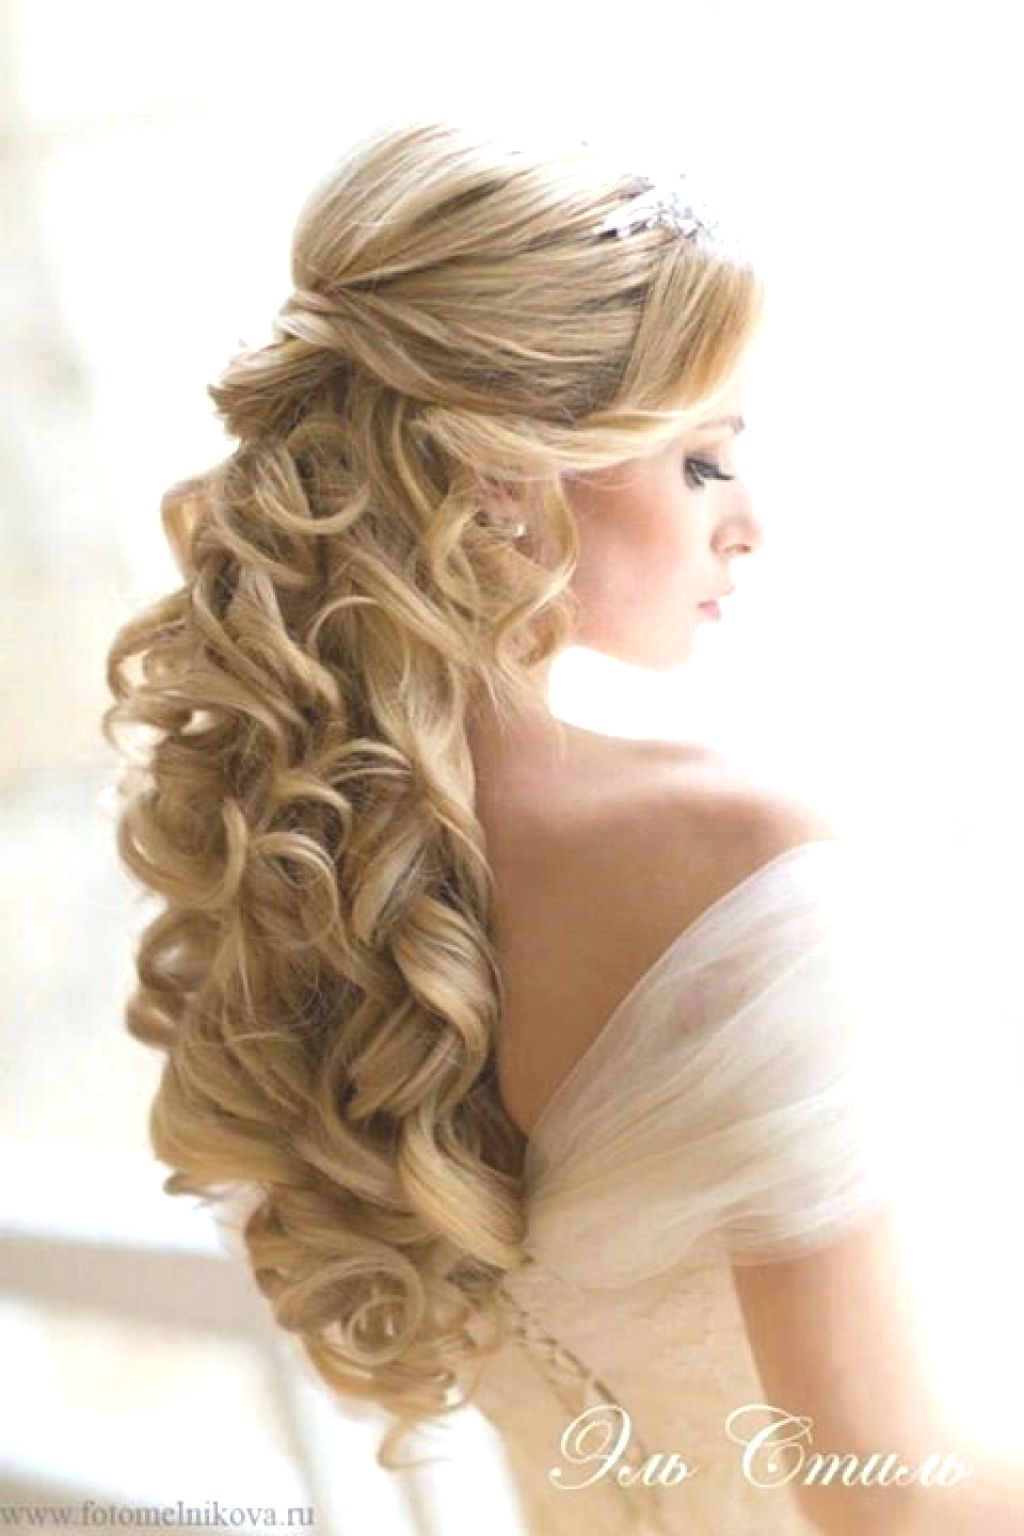 Hairstyles : Side Swept Updos For Weddings Astonishing Intended For Most Recent Side Swept Braid Updo Hairstyles (Gallery 20 of 20)